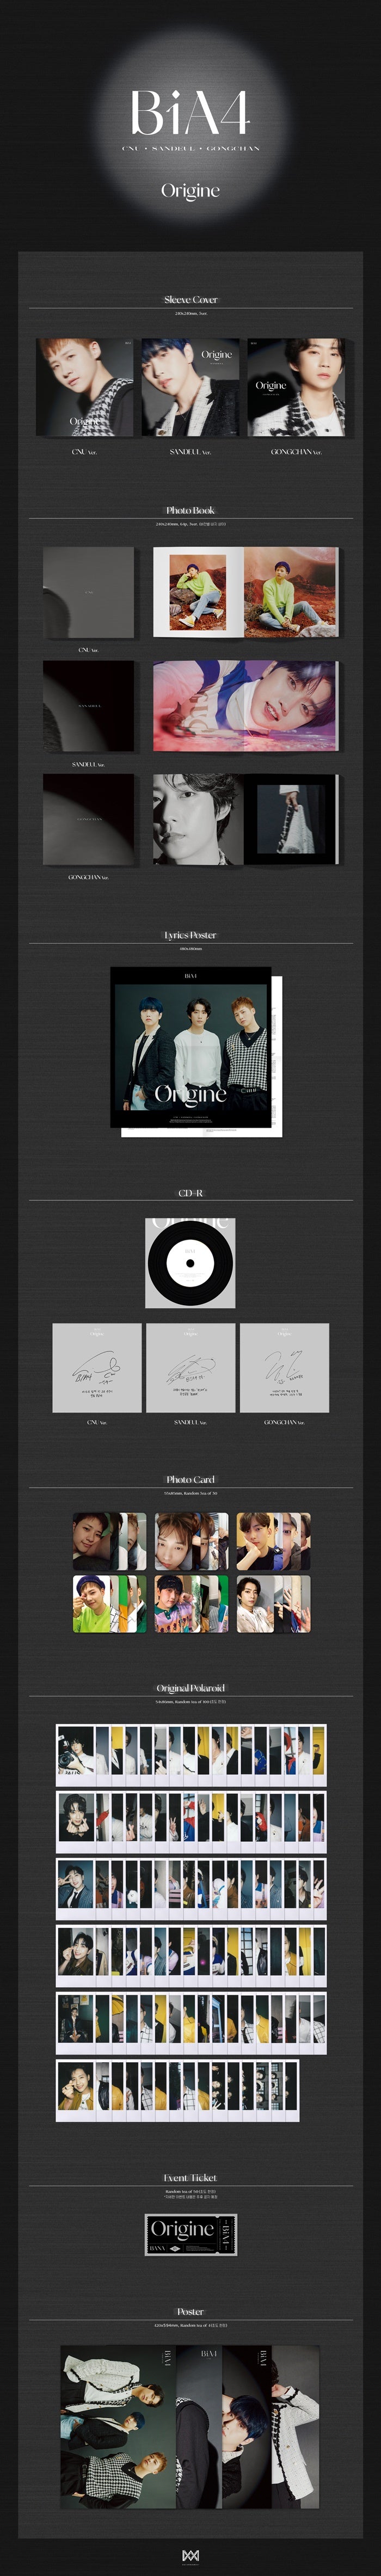 1 CD
1 Lyrics Poster 
1 Photo Book (64 pages)
3 Photo Cards